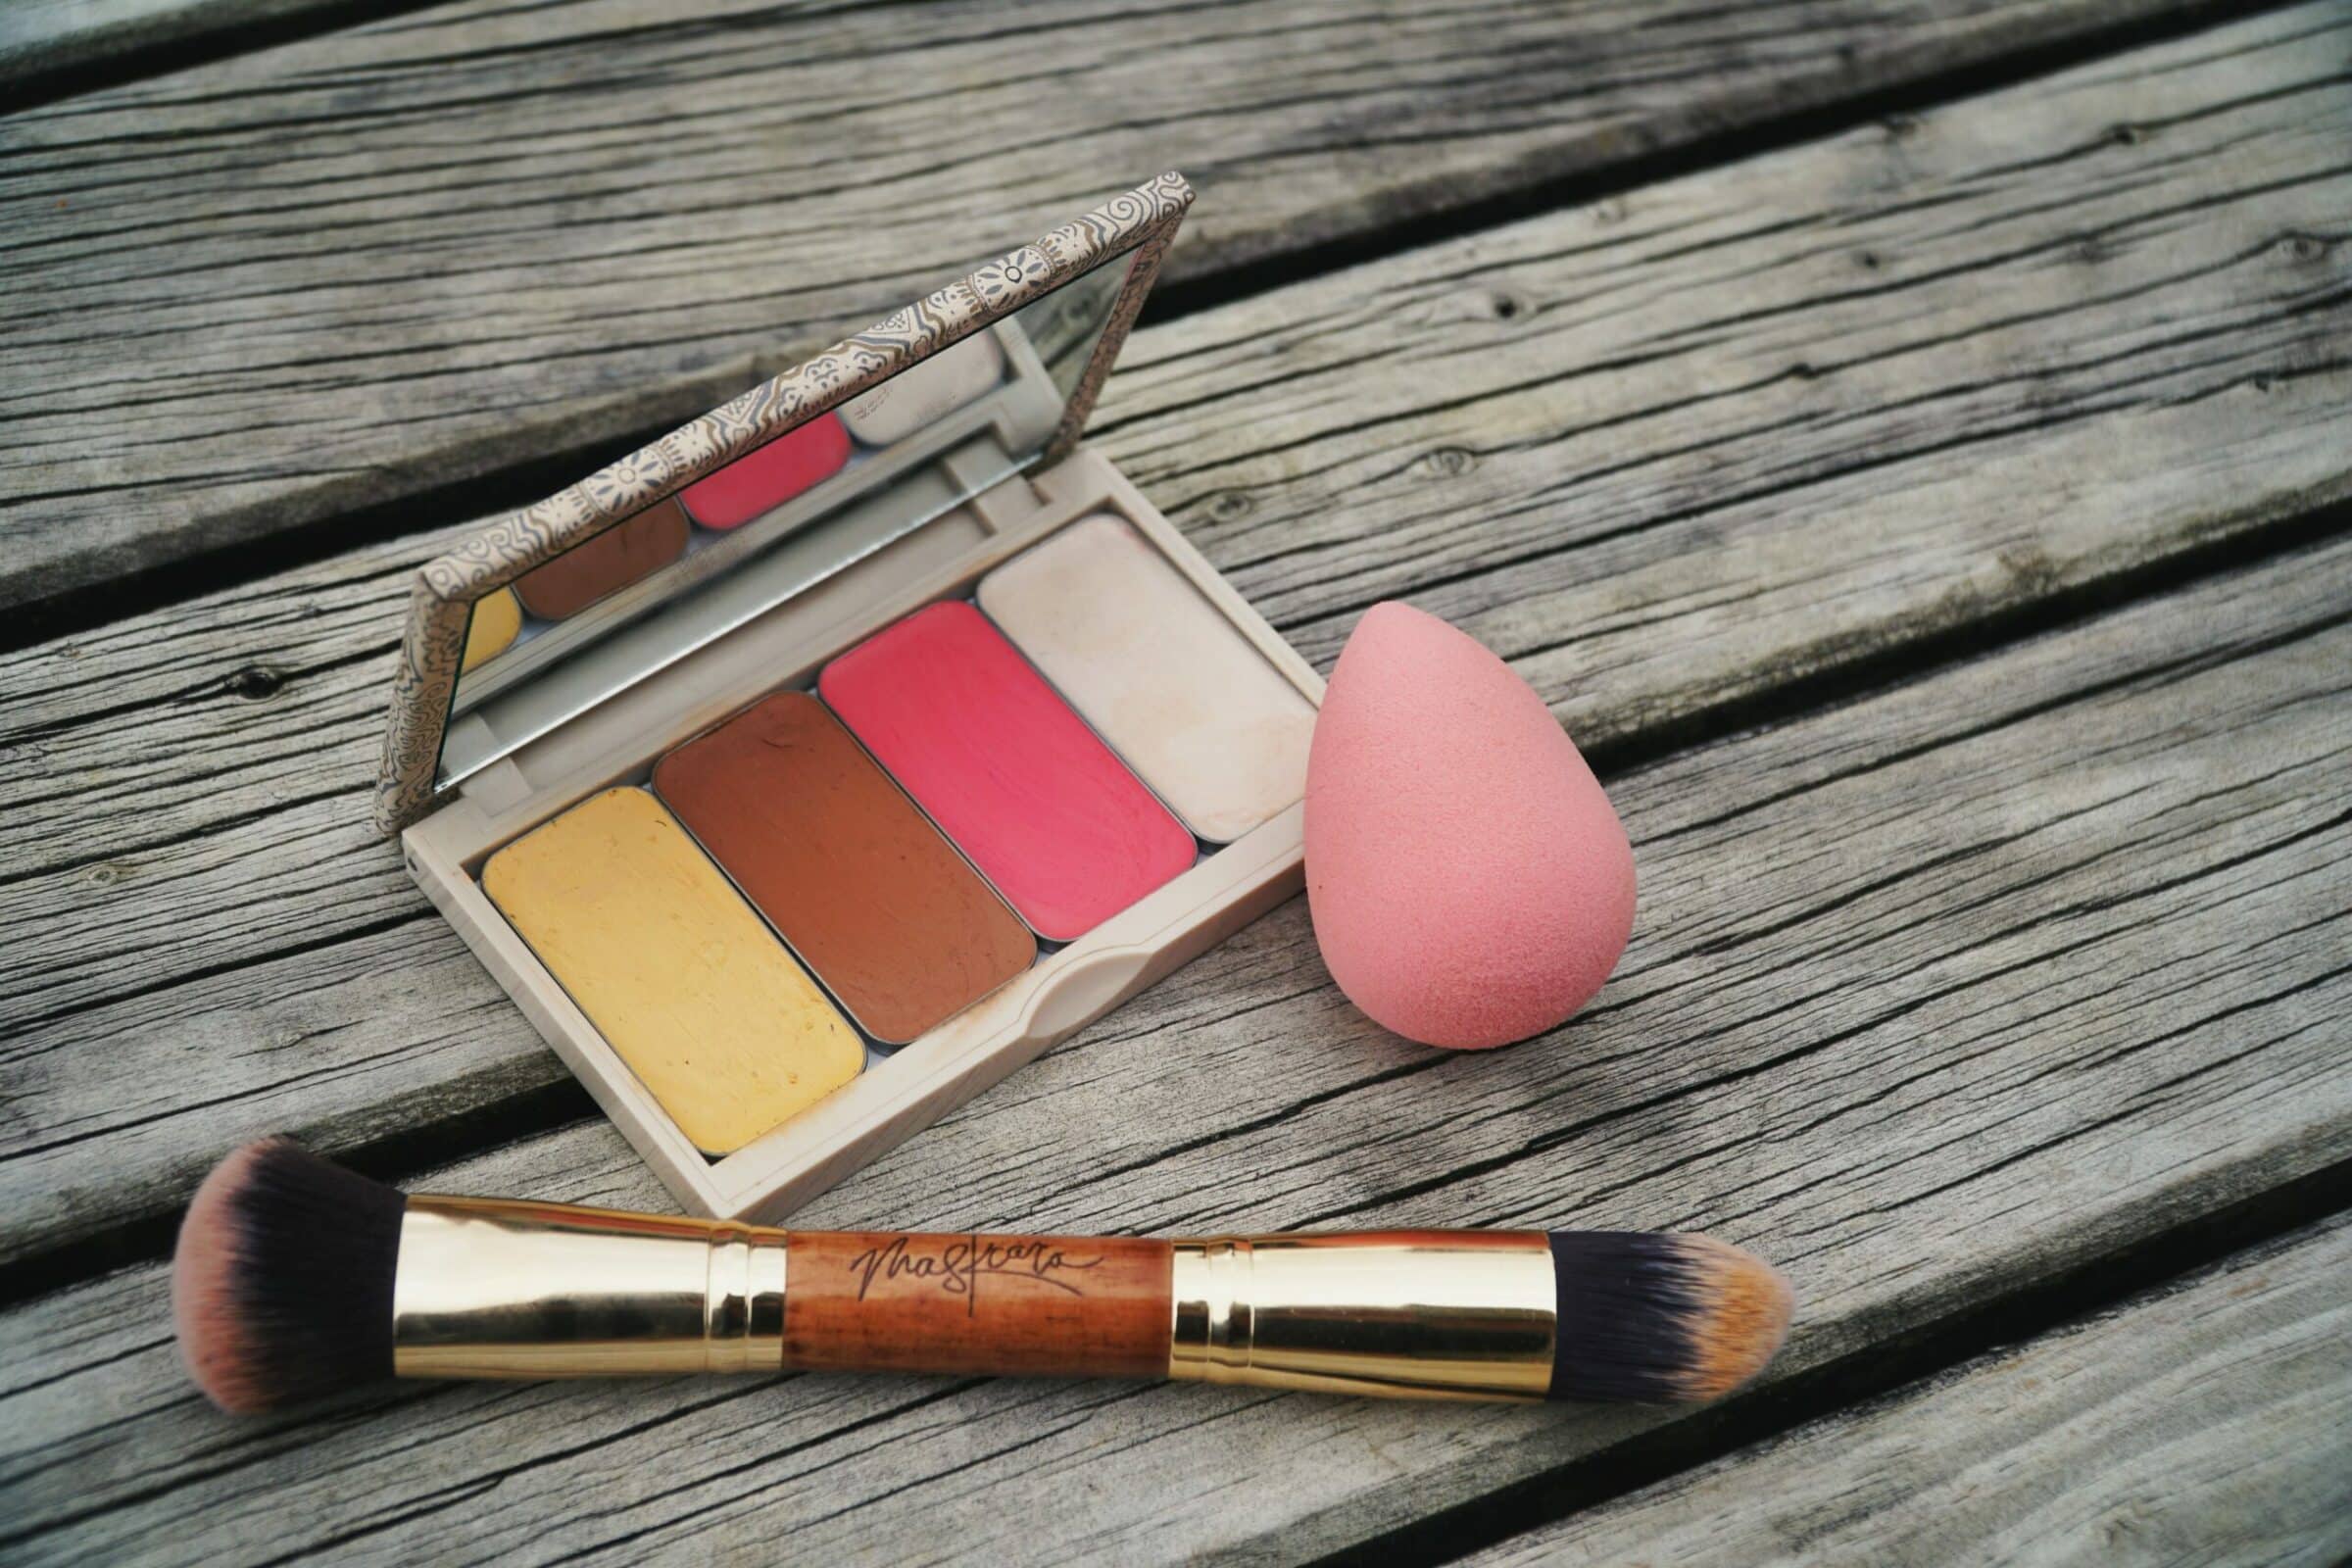 How to Fill a Compact with Maskcara Beauty, with maskcarabeautygirl.com, All you need to know to fill and remove colors from a Maskcara makeup compact